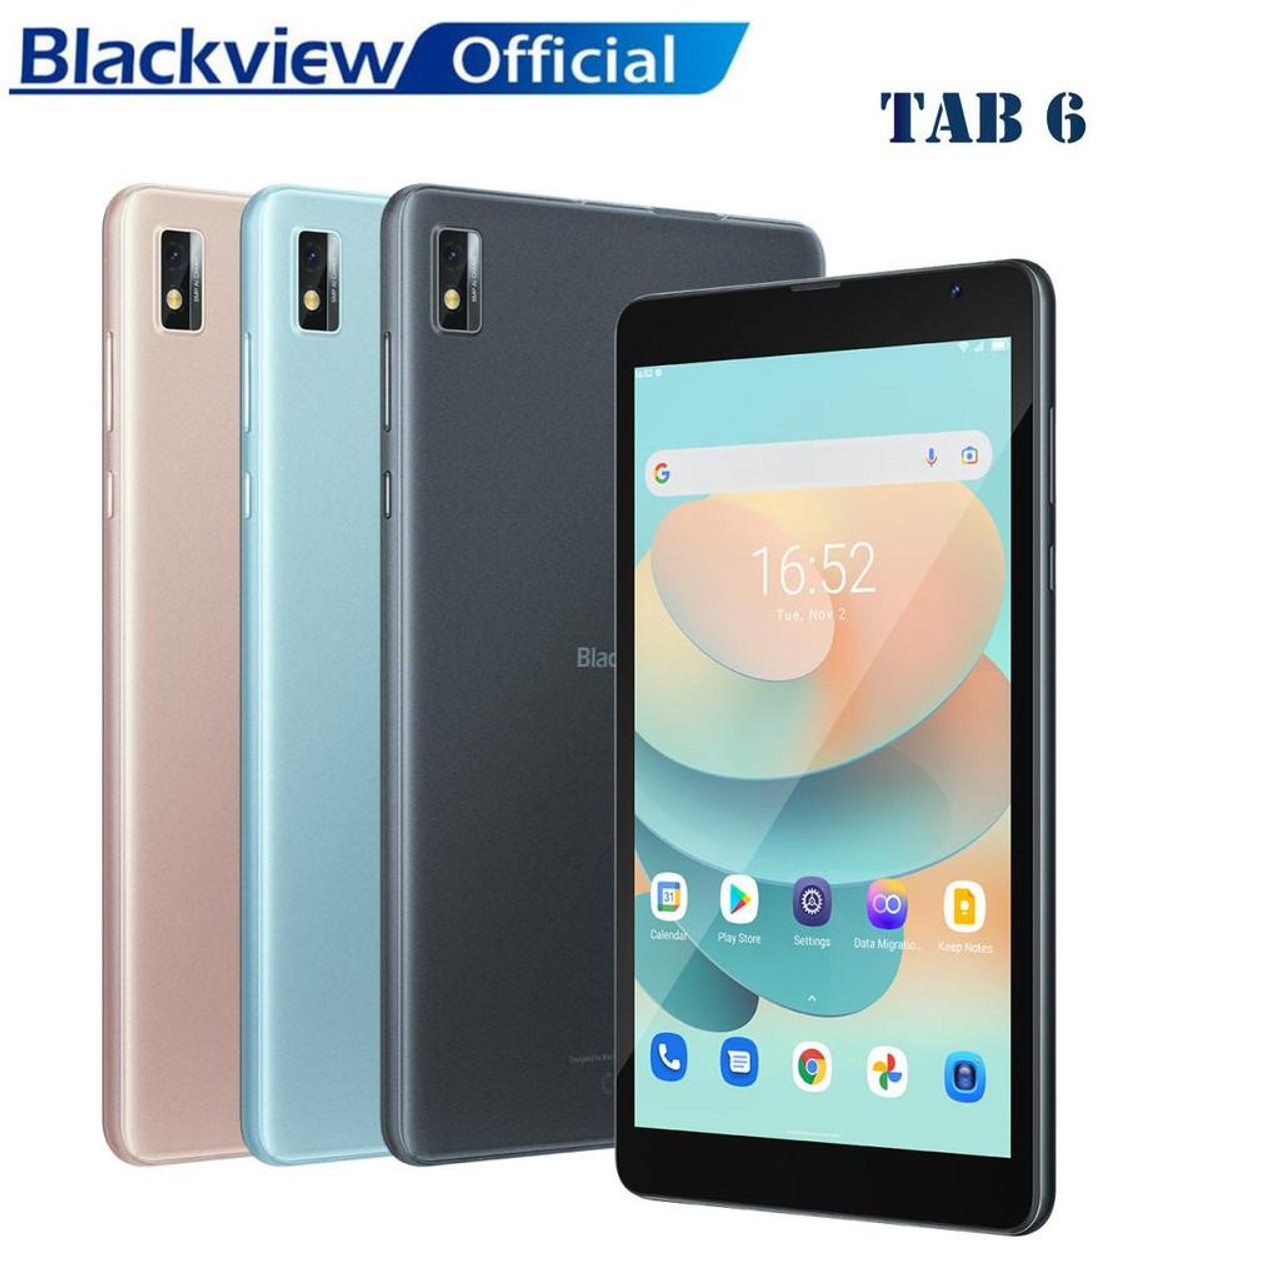 Blackview Tab 8E: An affordable 2-in-1 Android tablet with a